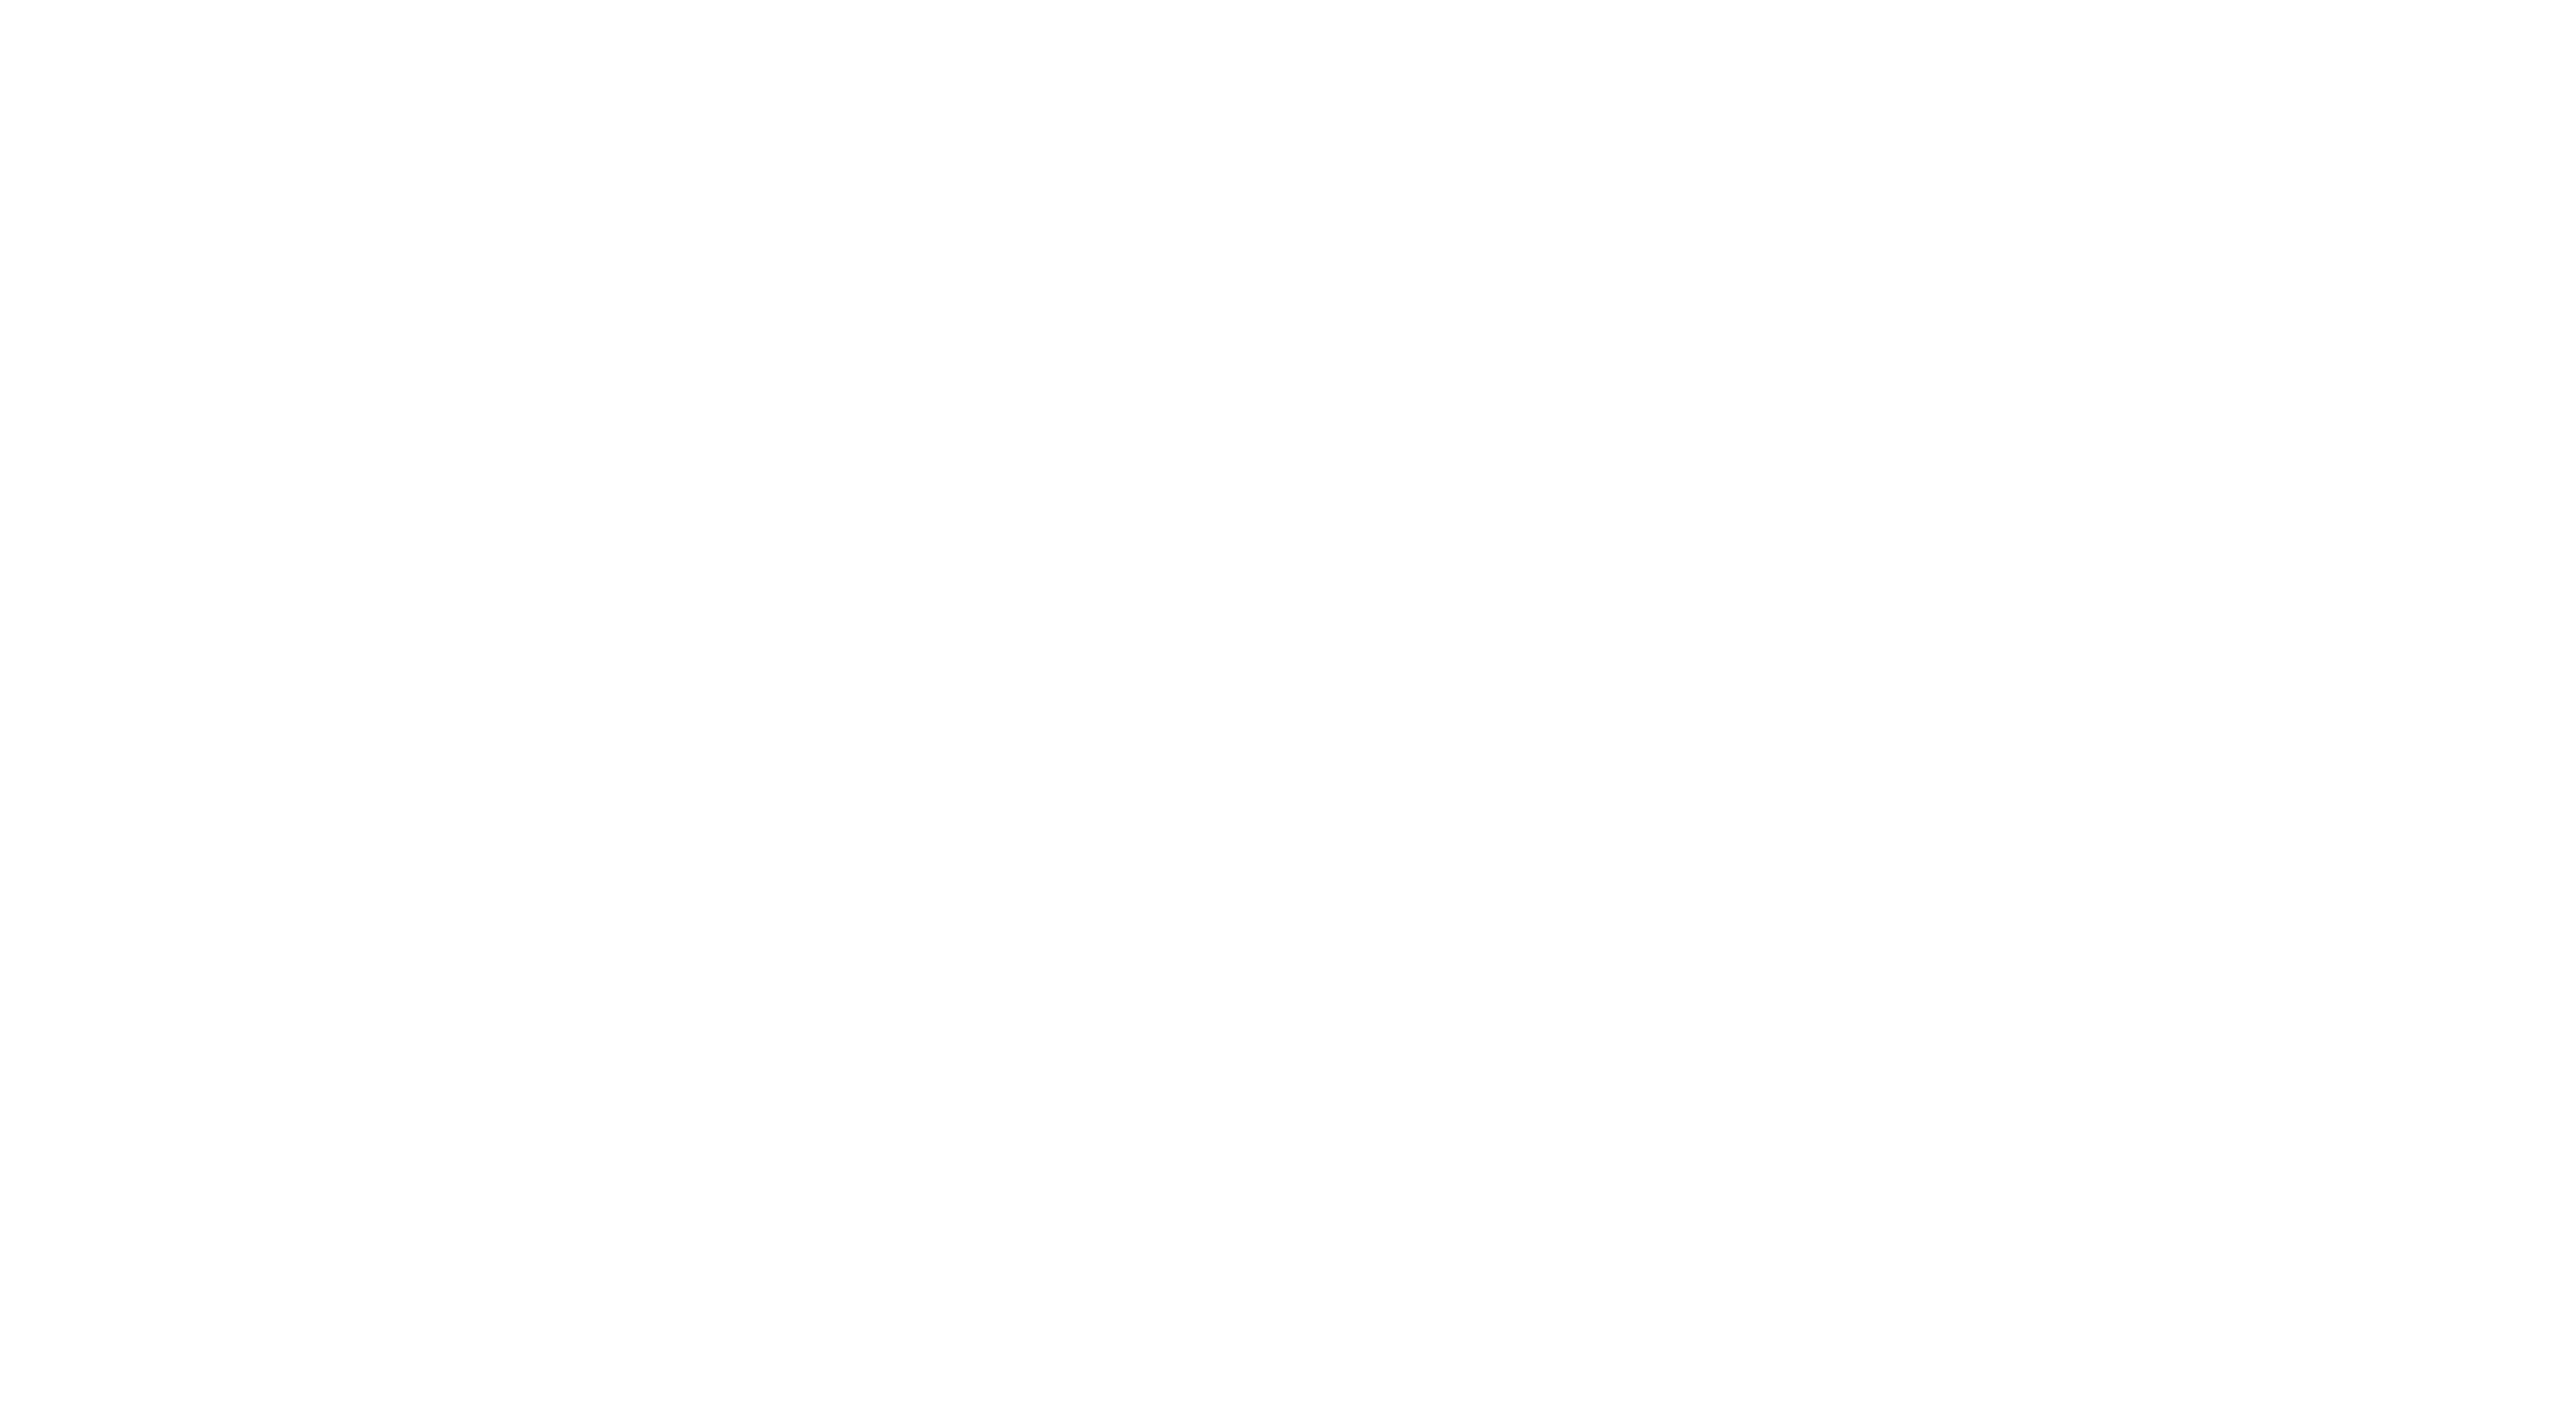 Supporting crisis